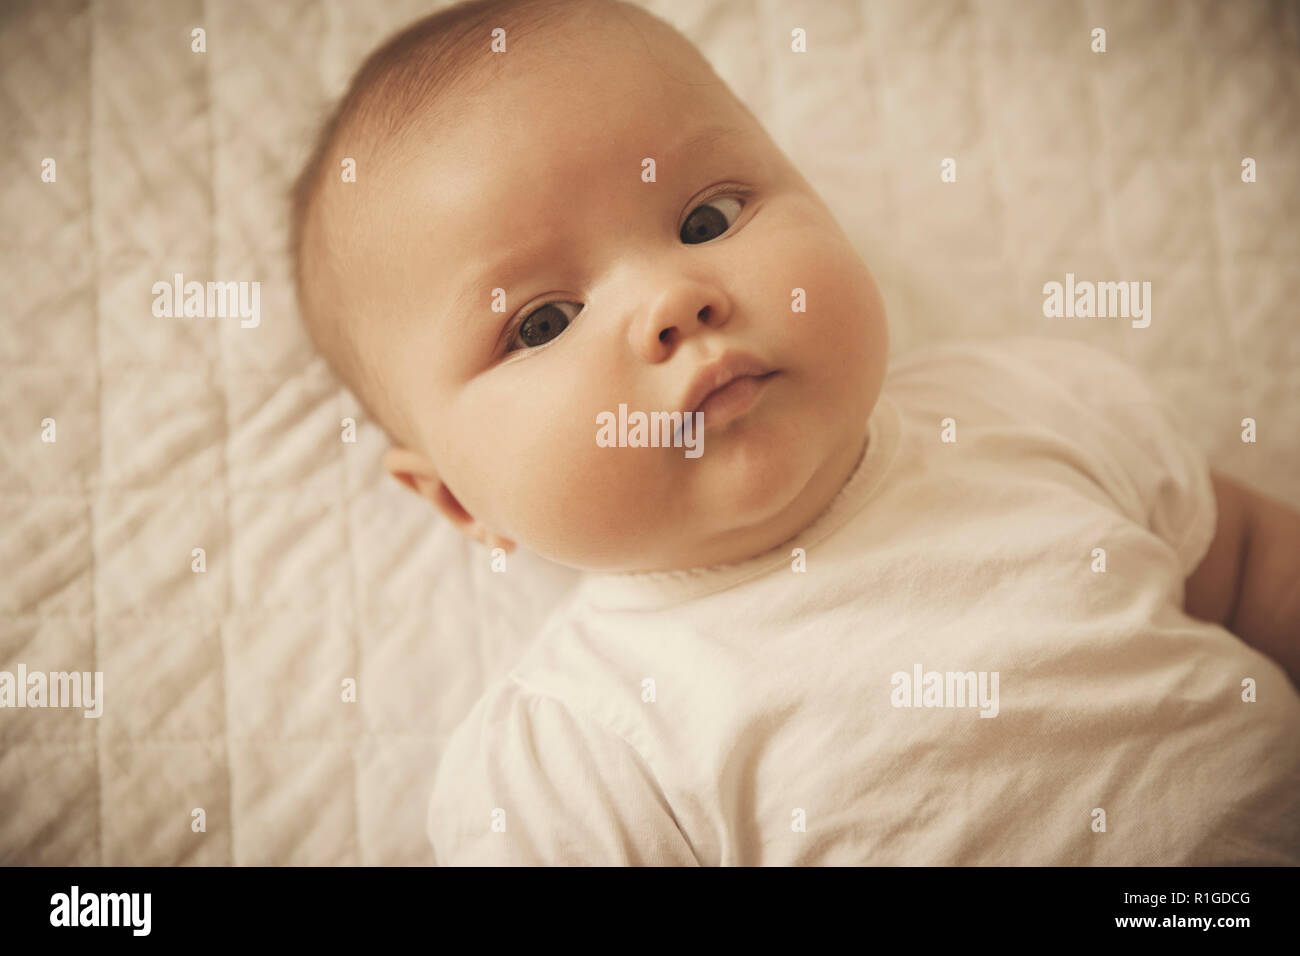 Portrait of a cute baby Stock Photo